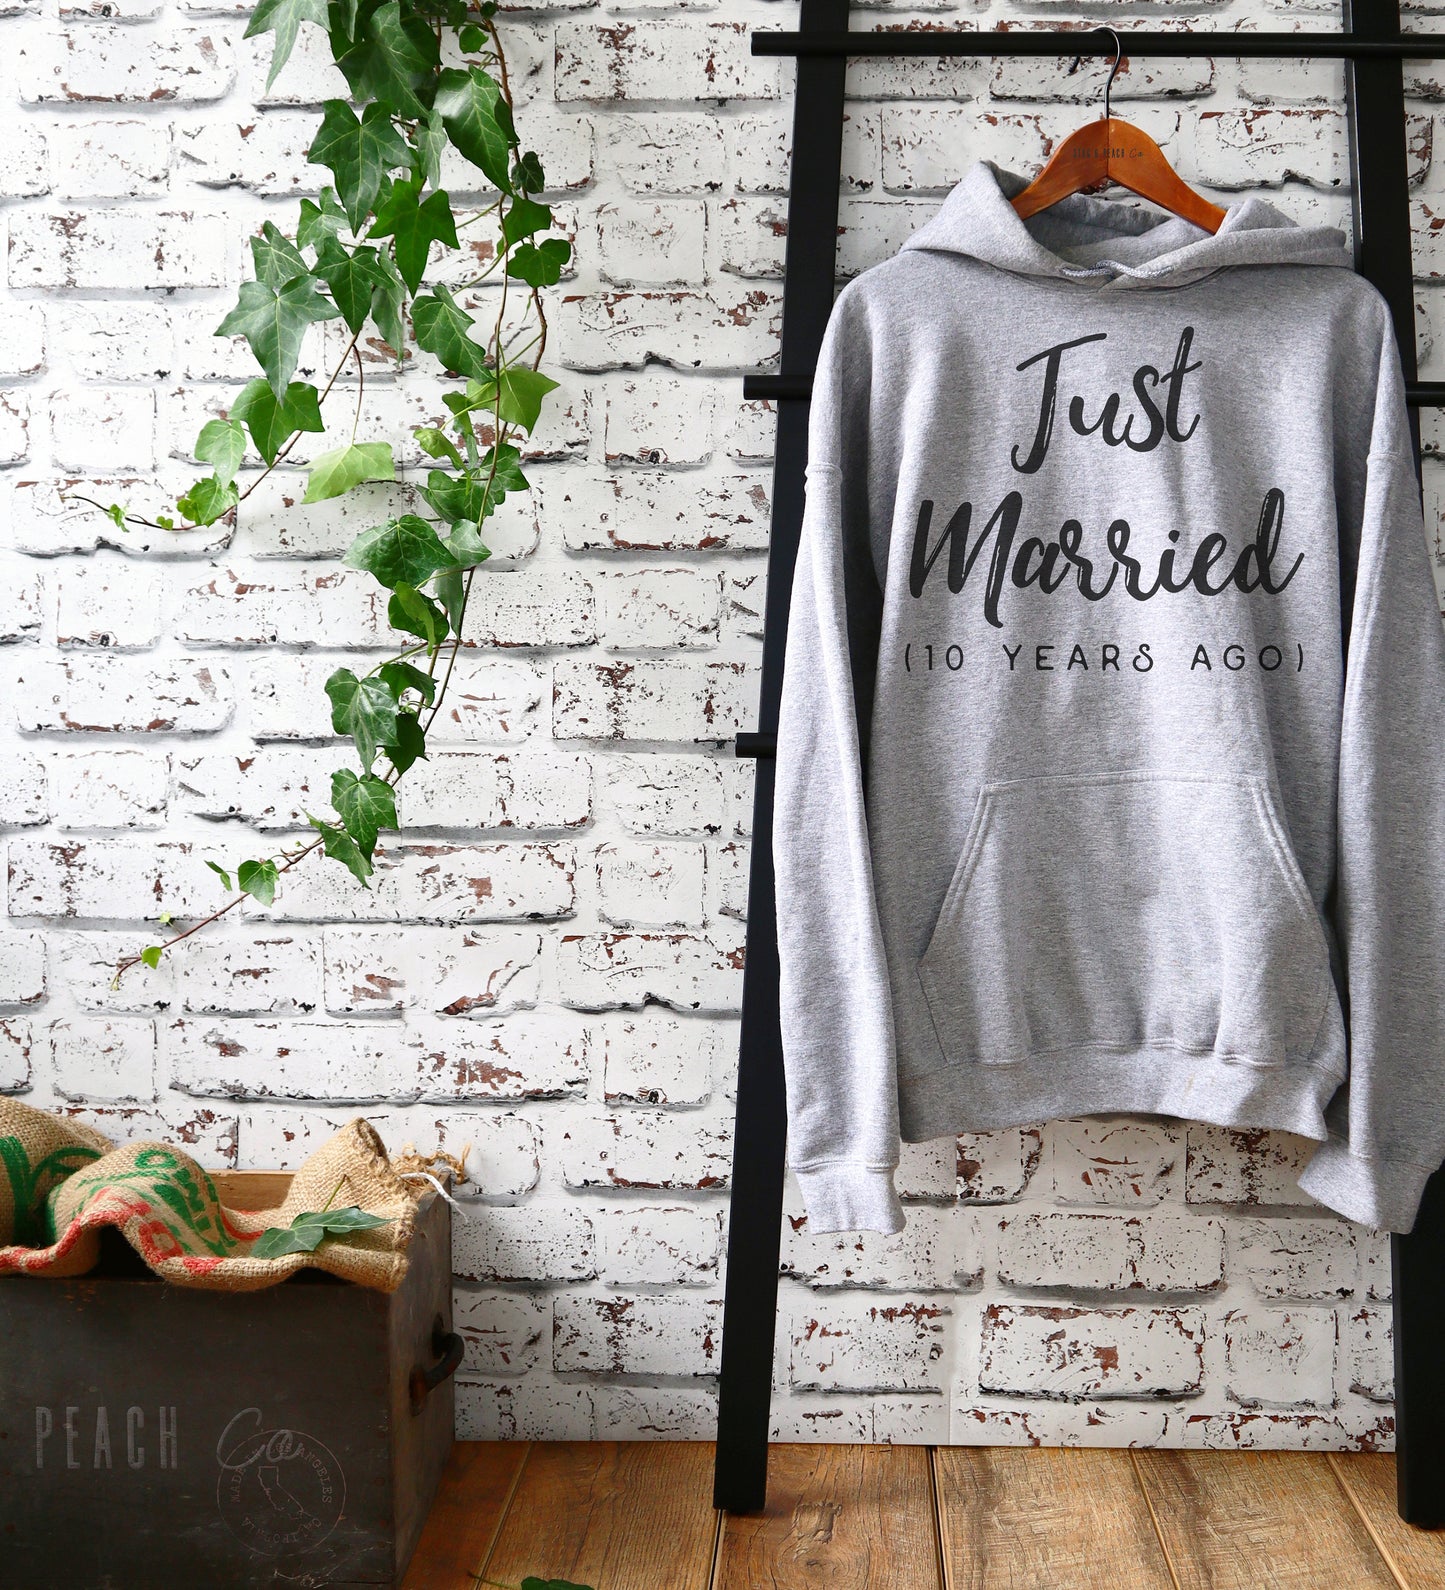 Just Married 10 Years Ago Unisex Hoodie - 10th Wedding Anniversary Shirt, Gift For Husband or Wife, We Still Do, Couple Shirts to Celebrate